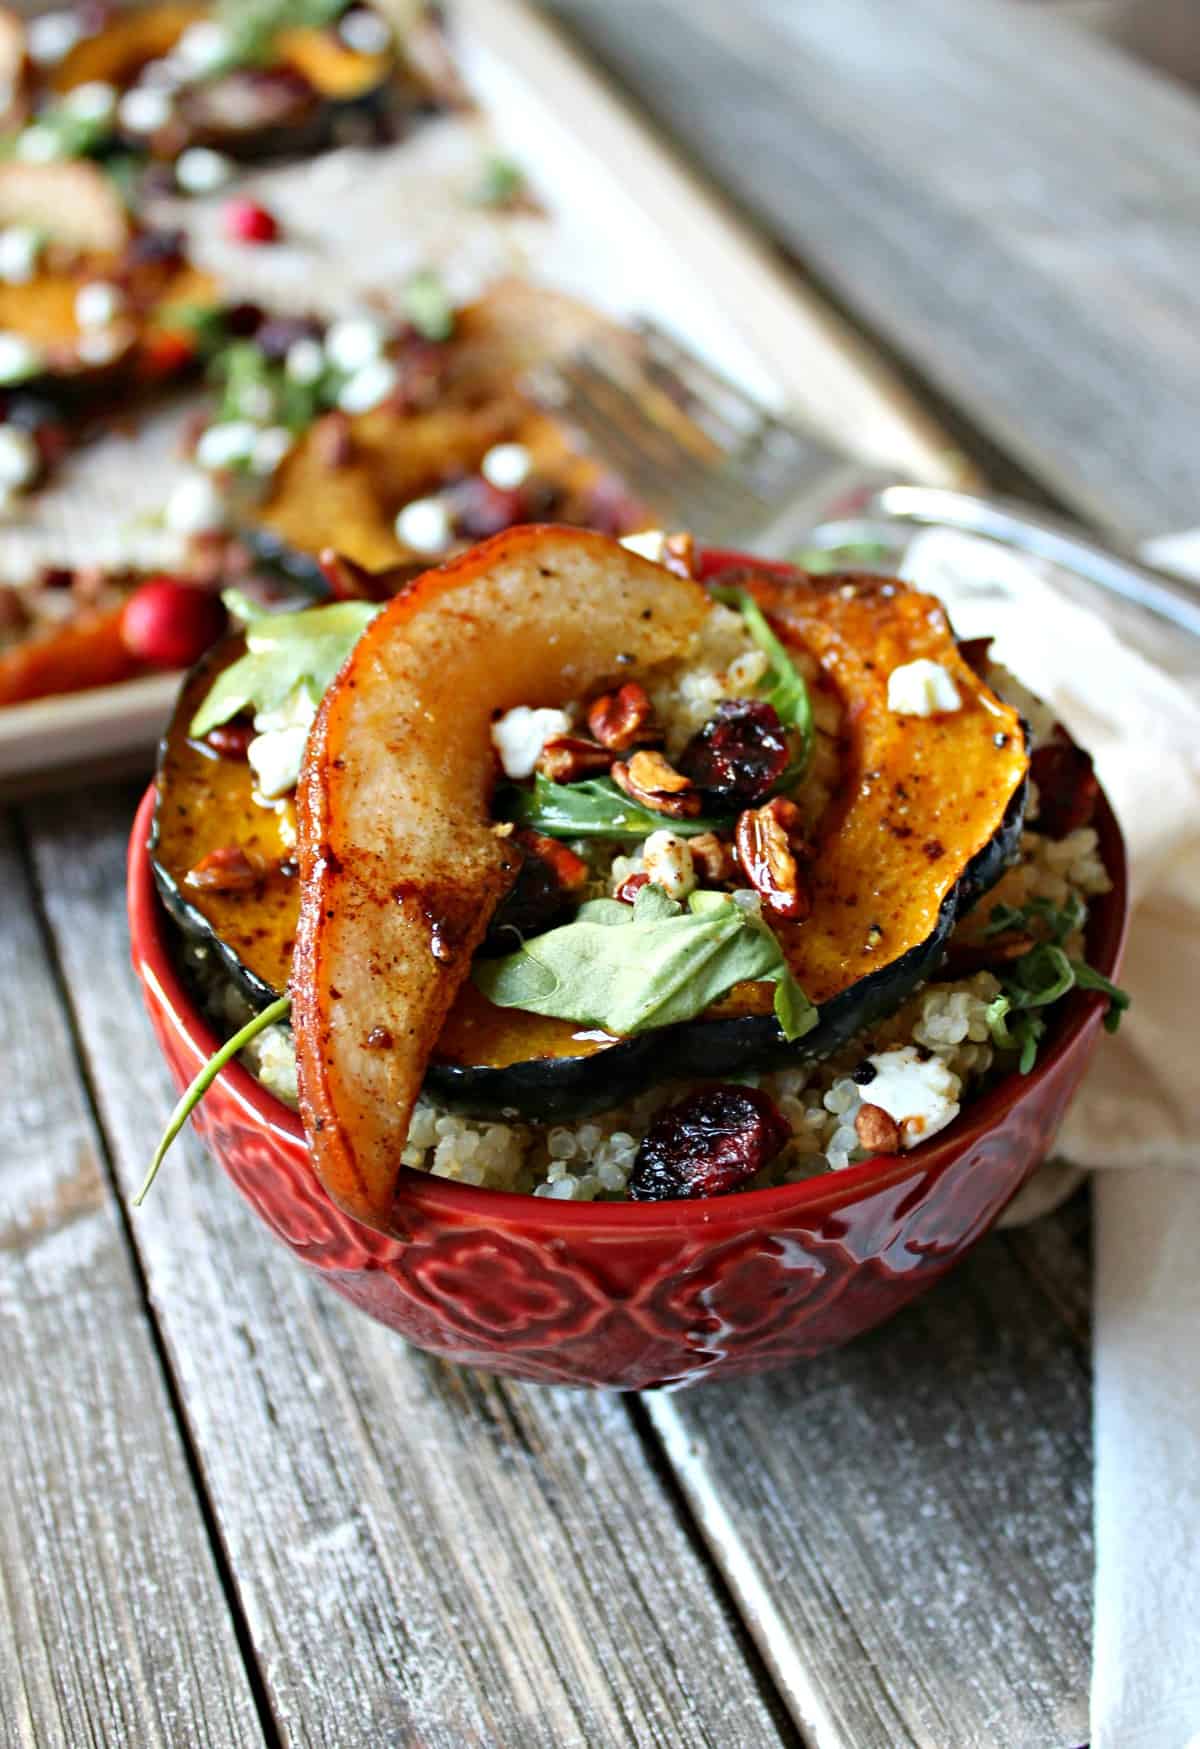 Spiced acorn squash, pears and quinoa cook simultaneously in the oven before being tossed with dried cranberries, pecans, goat cheese, and fresh arugula.